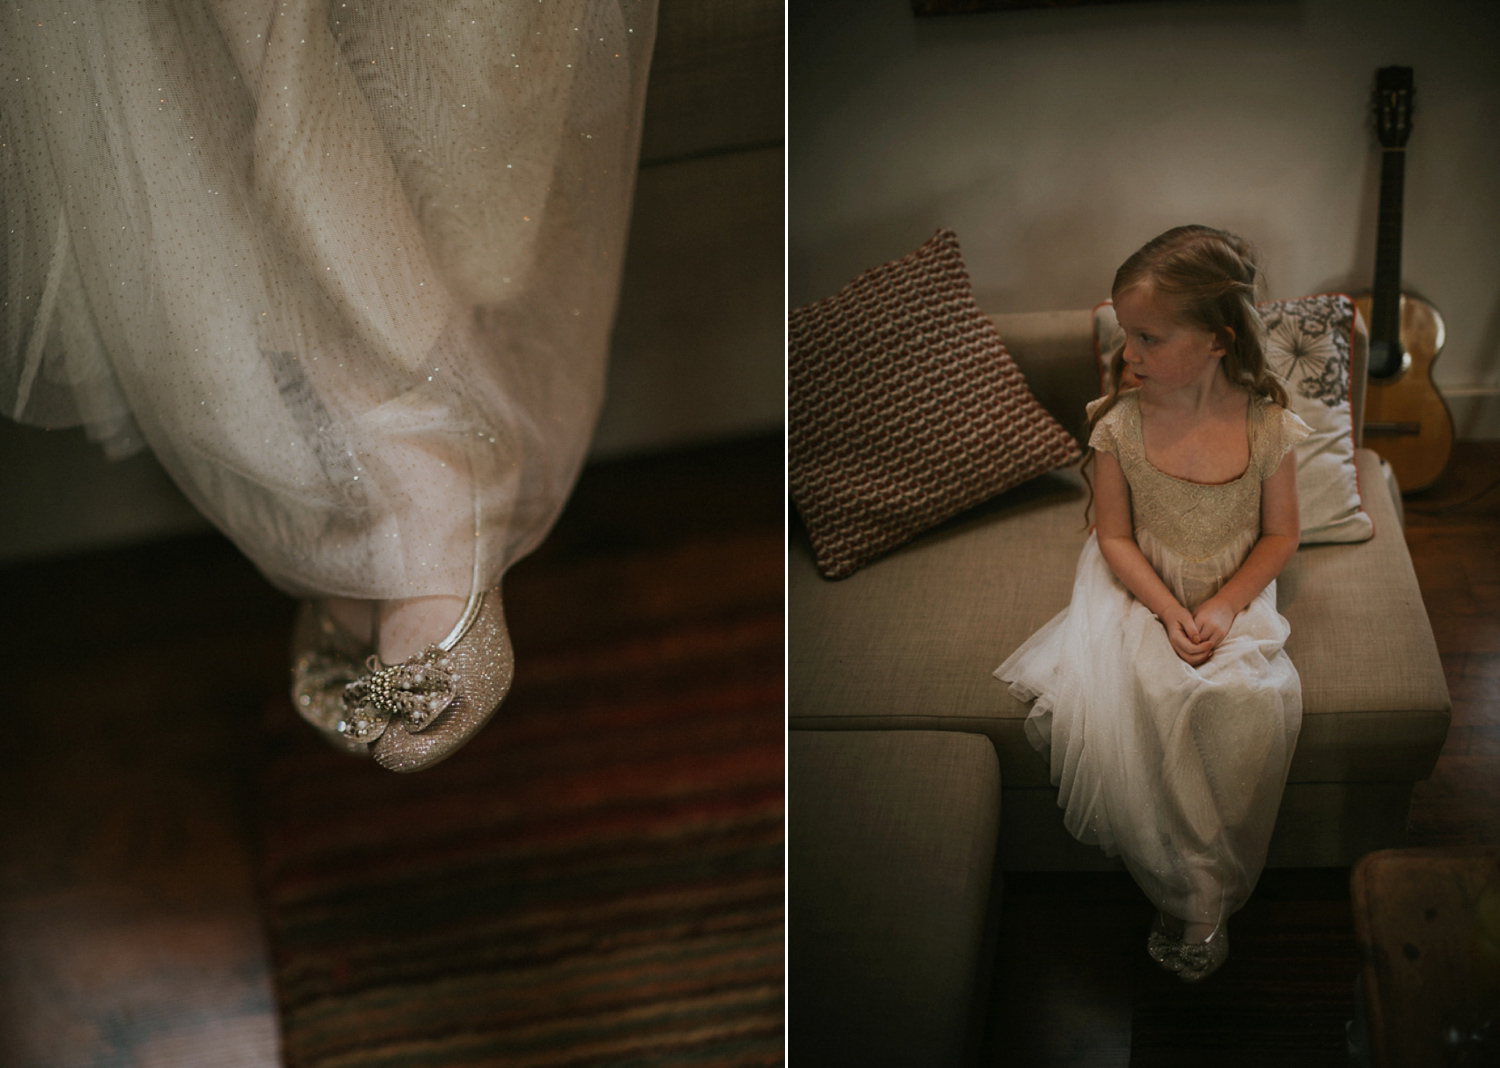 Alicia wore an Anna Campbell gown for her 1920's inspired rustic winter wedding. Photography by DSB Creative.